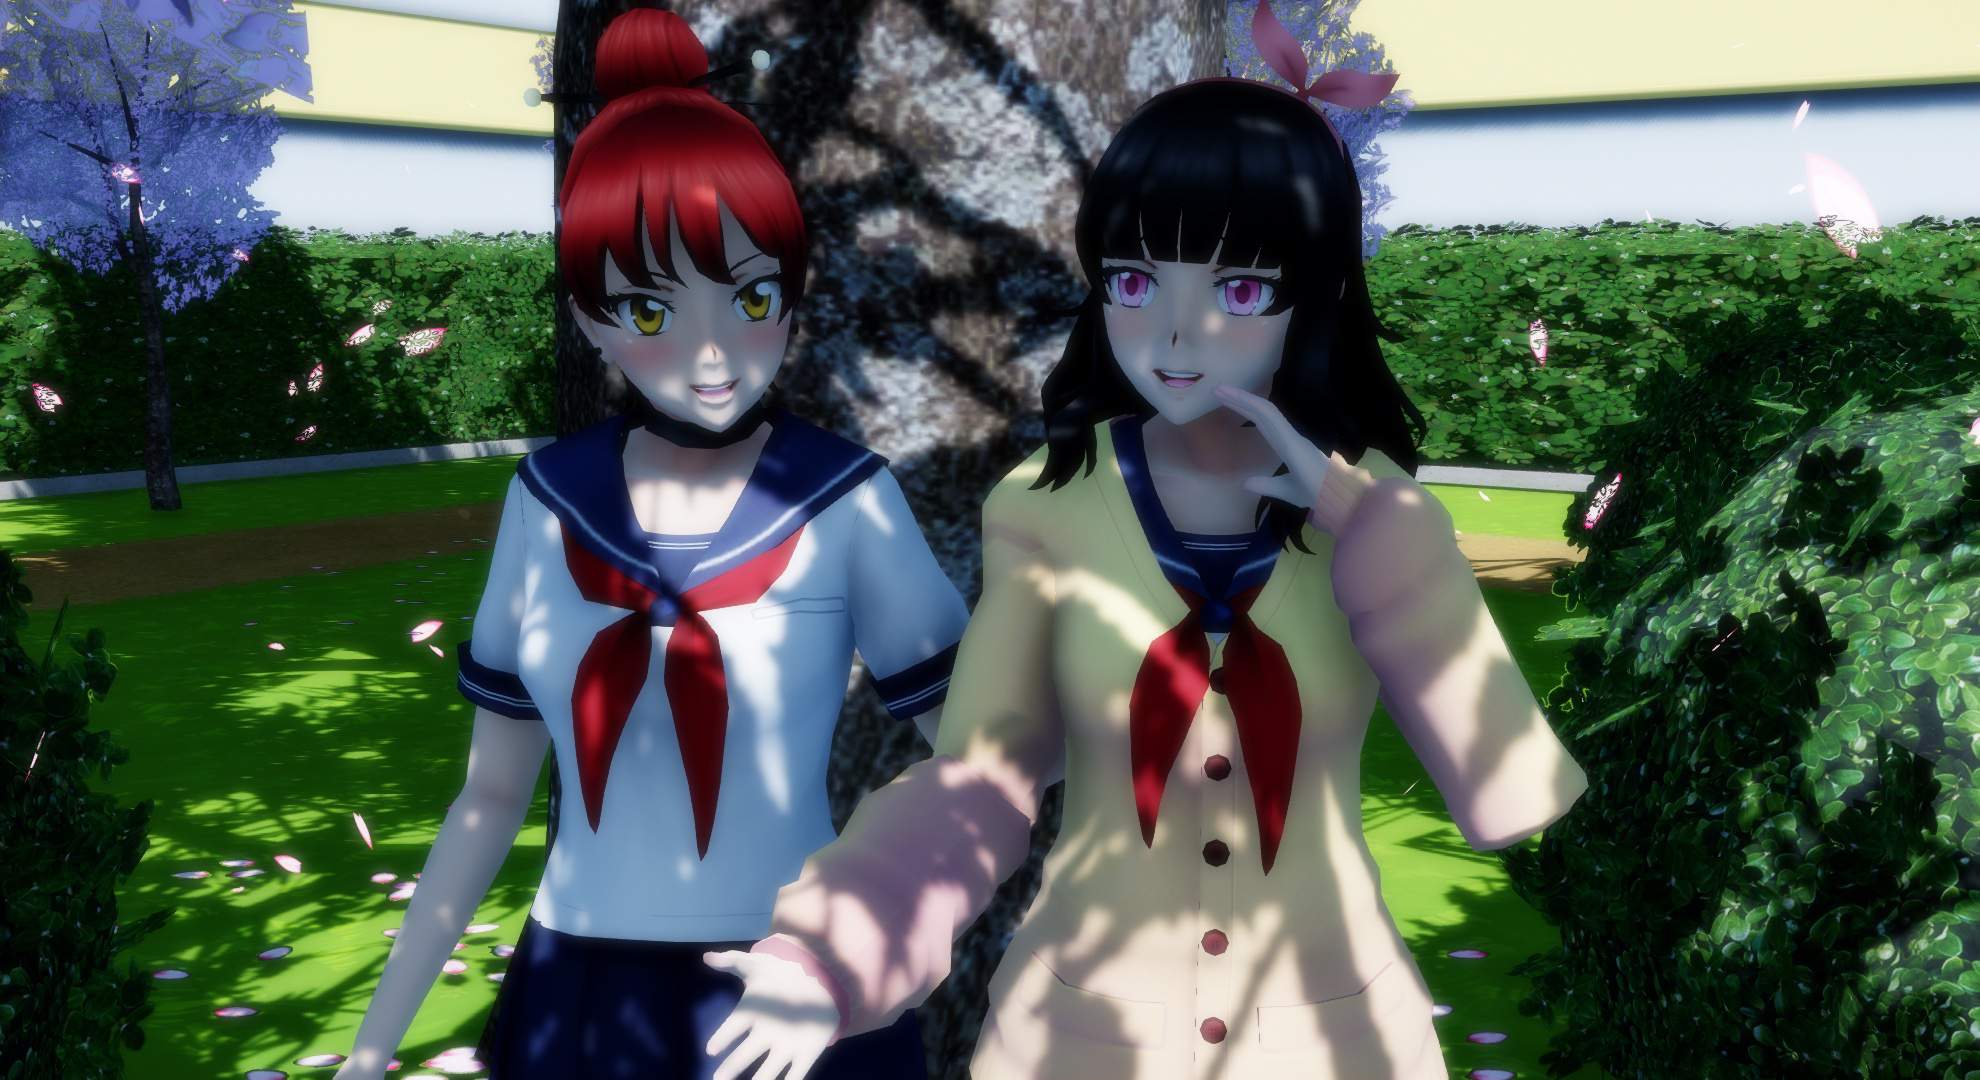 yandere simulator old builds may